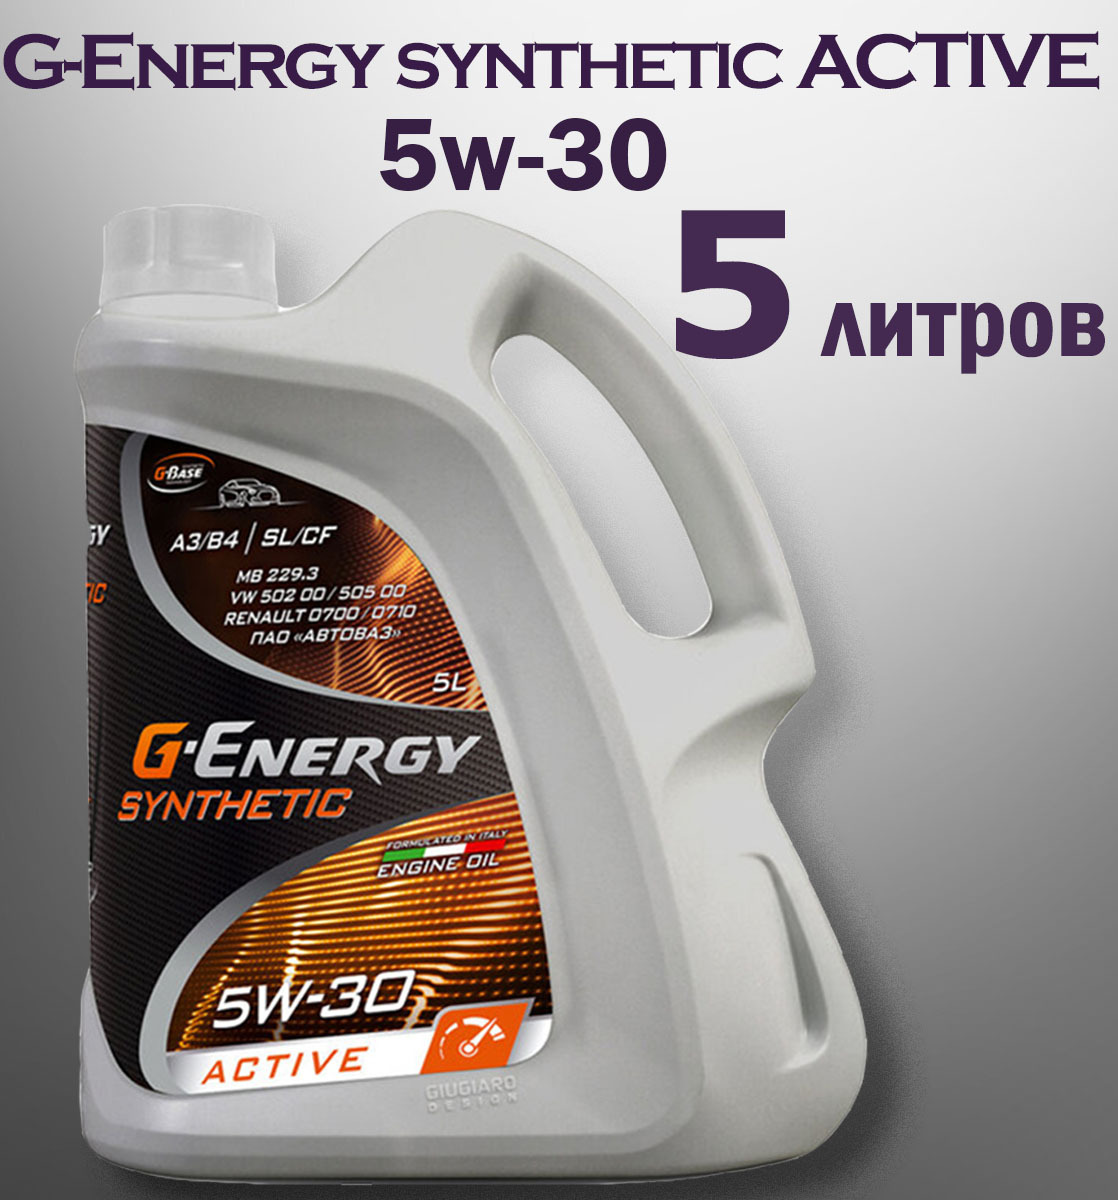 Масло g energy synthetic 5w 30. Масло g-Energy Syntetic Activ 5w30. G-Energy Synthetic Active 5w-30. G Energy 5w30 синтетика. Масло g Energy Synthetic Active 5w30.